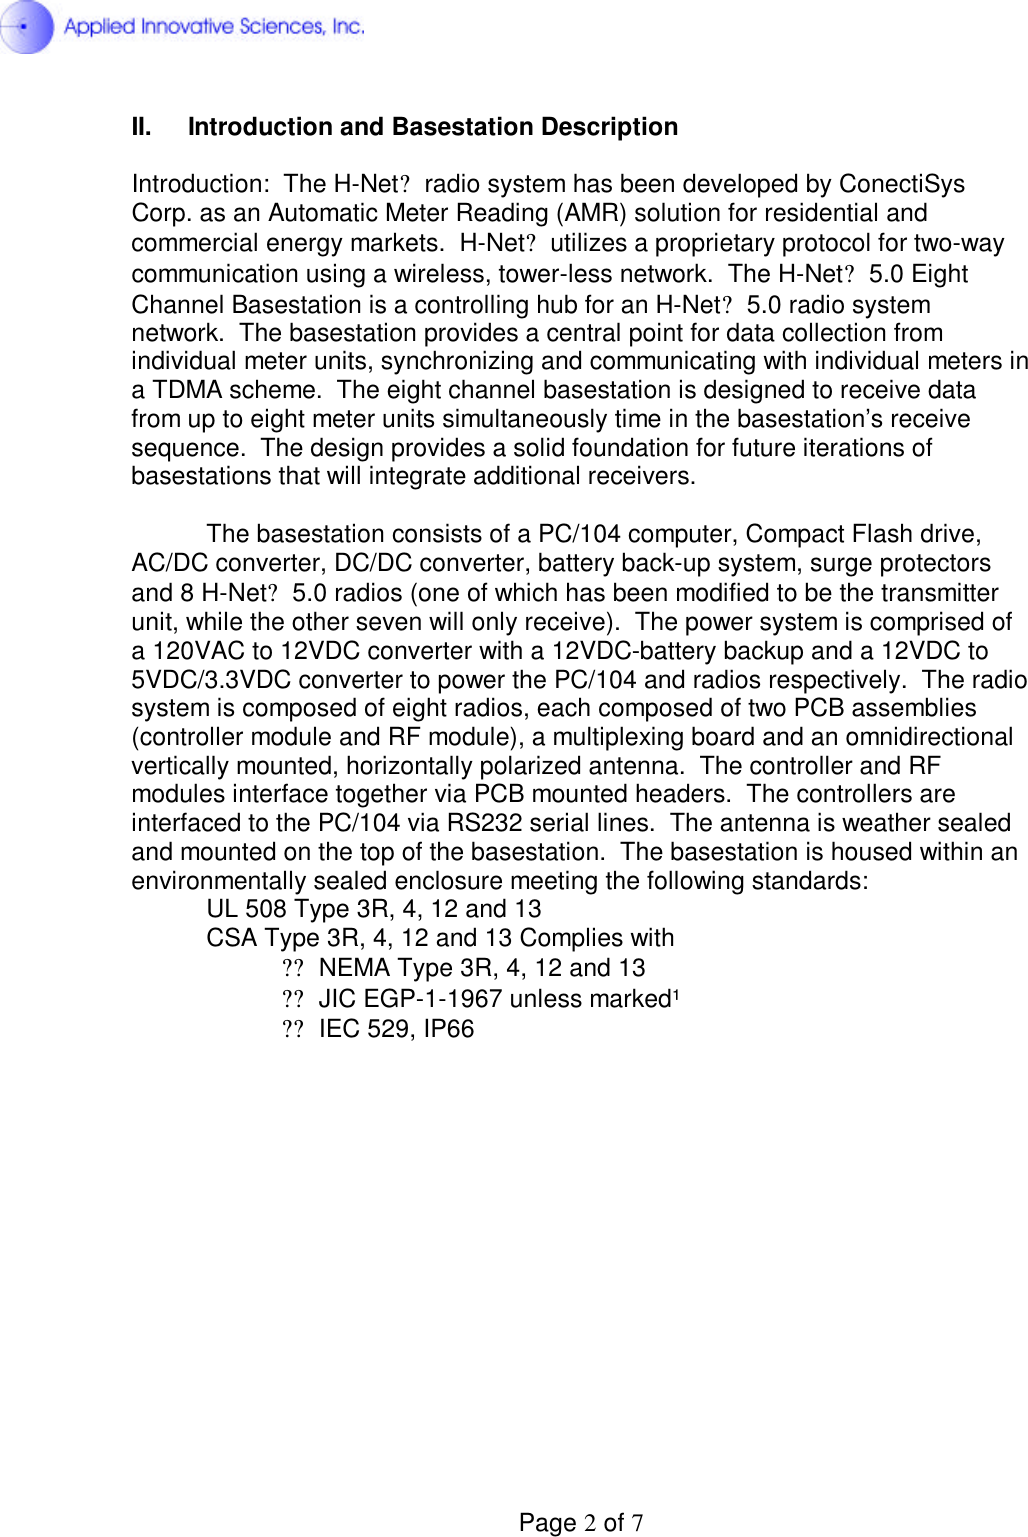  Page 2 of 7 II. Introduction and Basestation Description  Introduction:  The H-Net? radio system has been developed by ConectiSys Corp. as an Automatic Meter Reading (AMR) solution for residential and commercial energy markets.  H-Net? utilizes a proprietary protocol for two-way communication using a wireless, tower-less network.  The H-Net? 5.0 Eight Channel Basestation is a controlling hub for an H-Net? 5.0 radio system network.  The basestation provides a central point for data collection from individual meter units, synchronizing and communicating with individual meters in a TDMA scheme.  The eight channel basestation is designed to receive data from up to eight meter units simultaneously time in the basestation’s receive sequence.  The design provides a solid foundation for future iterations of basestations that will integrate additional receivers.    The basestation consists of a PC/104 computer, Compact Flash drive, AC/DC converter, DC/DC converter, battery back-up system, surge protectors and 8 H-Net? 5.0 radios (one of which has been modified to be the transmitter unit, while the other seven will only receive).  The power system is comprised of a 120VAC to 12VDC converter with a 12VDC-battery backup and a 12VDC to 5VDC/3.3VDC converter to power the PC/104 and radios respectively.  The radio system is composed of eight radios, each composed of two PCB assemblies (controller module and RF module), a multiplexing board and an omnidirectional vertically mounted, horizontally polarized antenna.  The controller and RF modules interface together via PCB mounted headers.  The controllers are interfaced to the PC/104 via RS232 serial lines.  The antenna is weather sealed and mounted on the top of the basestation.  The basestation is housed within an environmentally sealed enclosure meeting the following standards: UL 508 Type 3R, 4, 12 and 13  CSA Type 3R, 4, 12 and 13 Complies with  ??NEMA Type 3R, 4, 12 and 13  ??JIC EGP-1-1967 unless marked¹  ??IEC 529, IP66                 